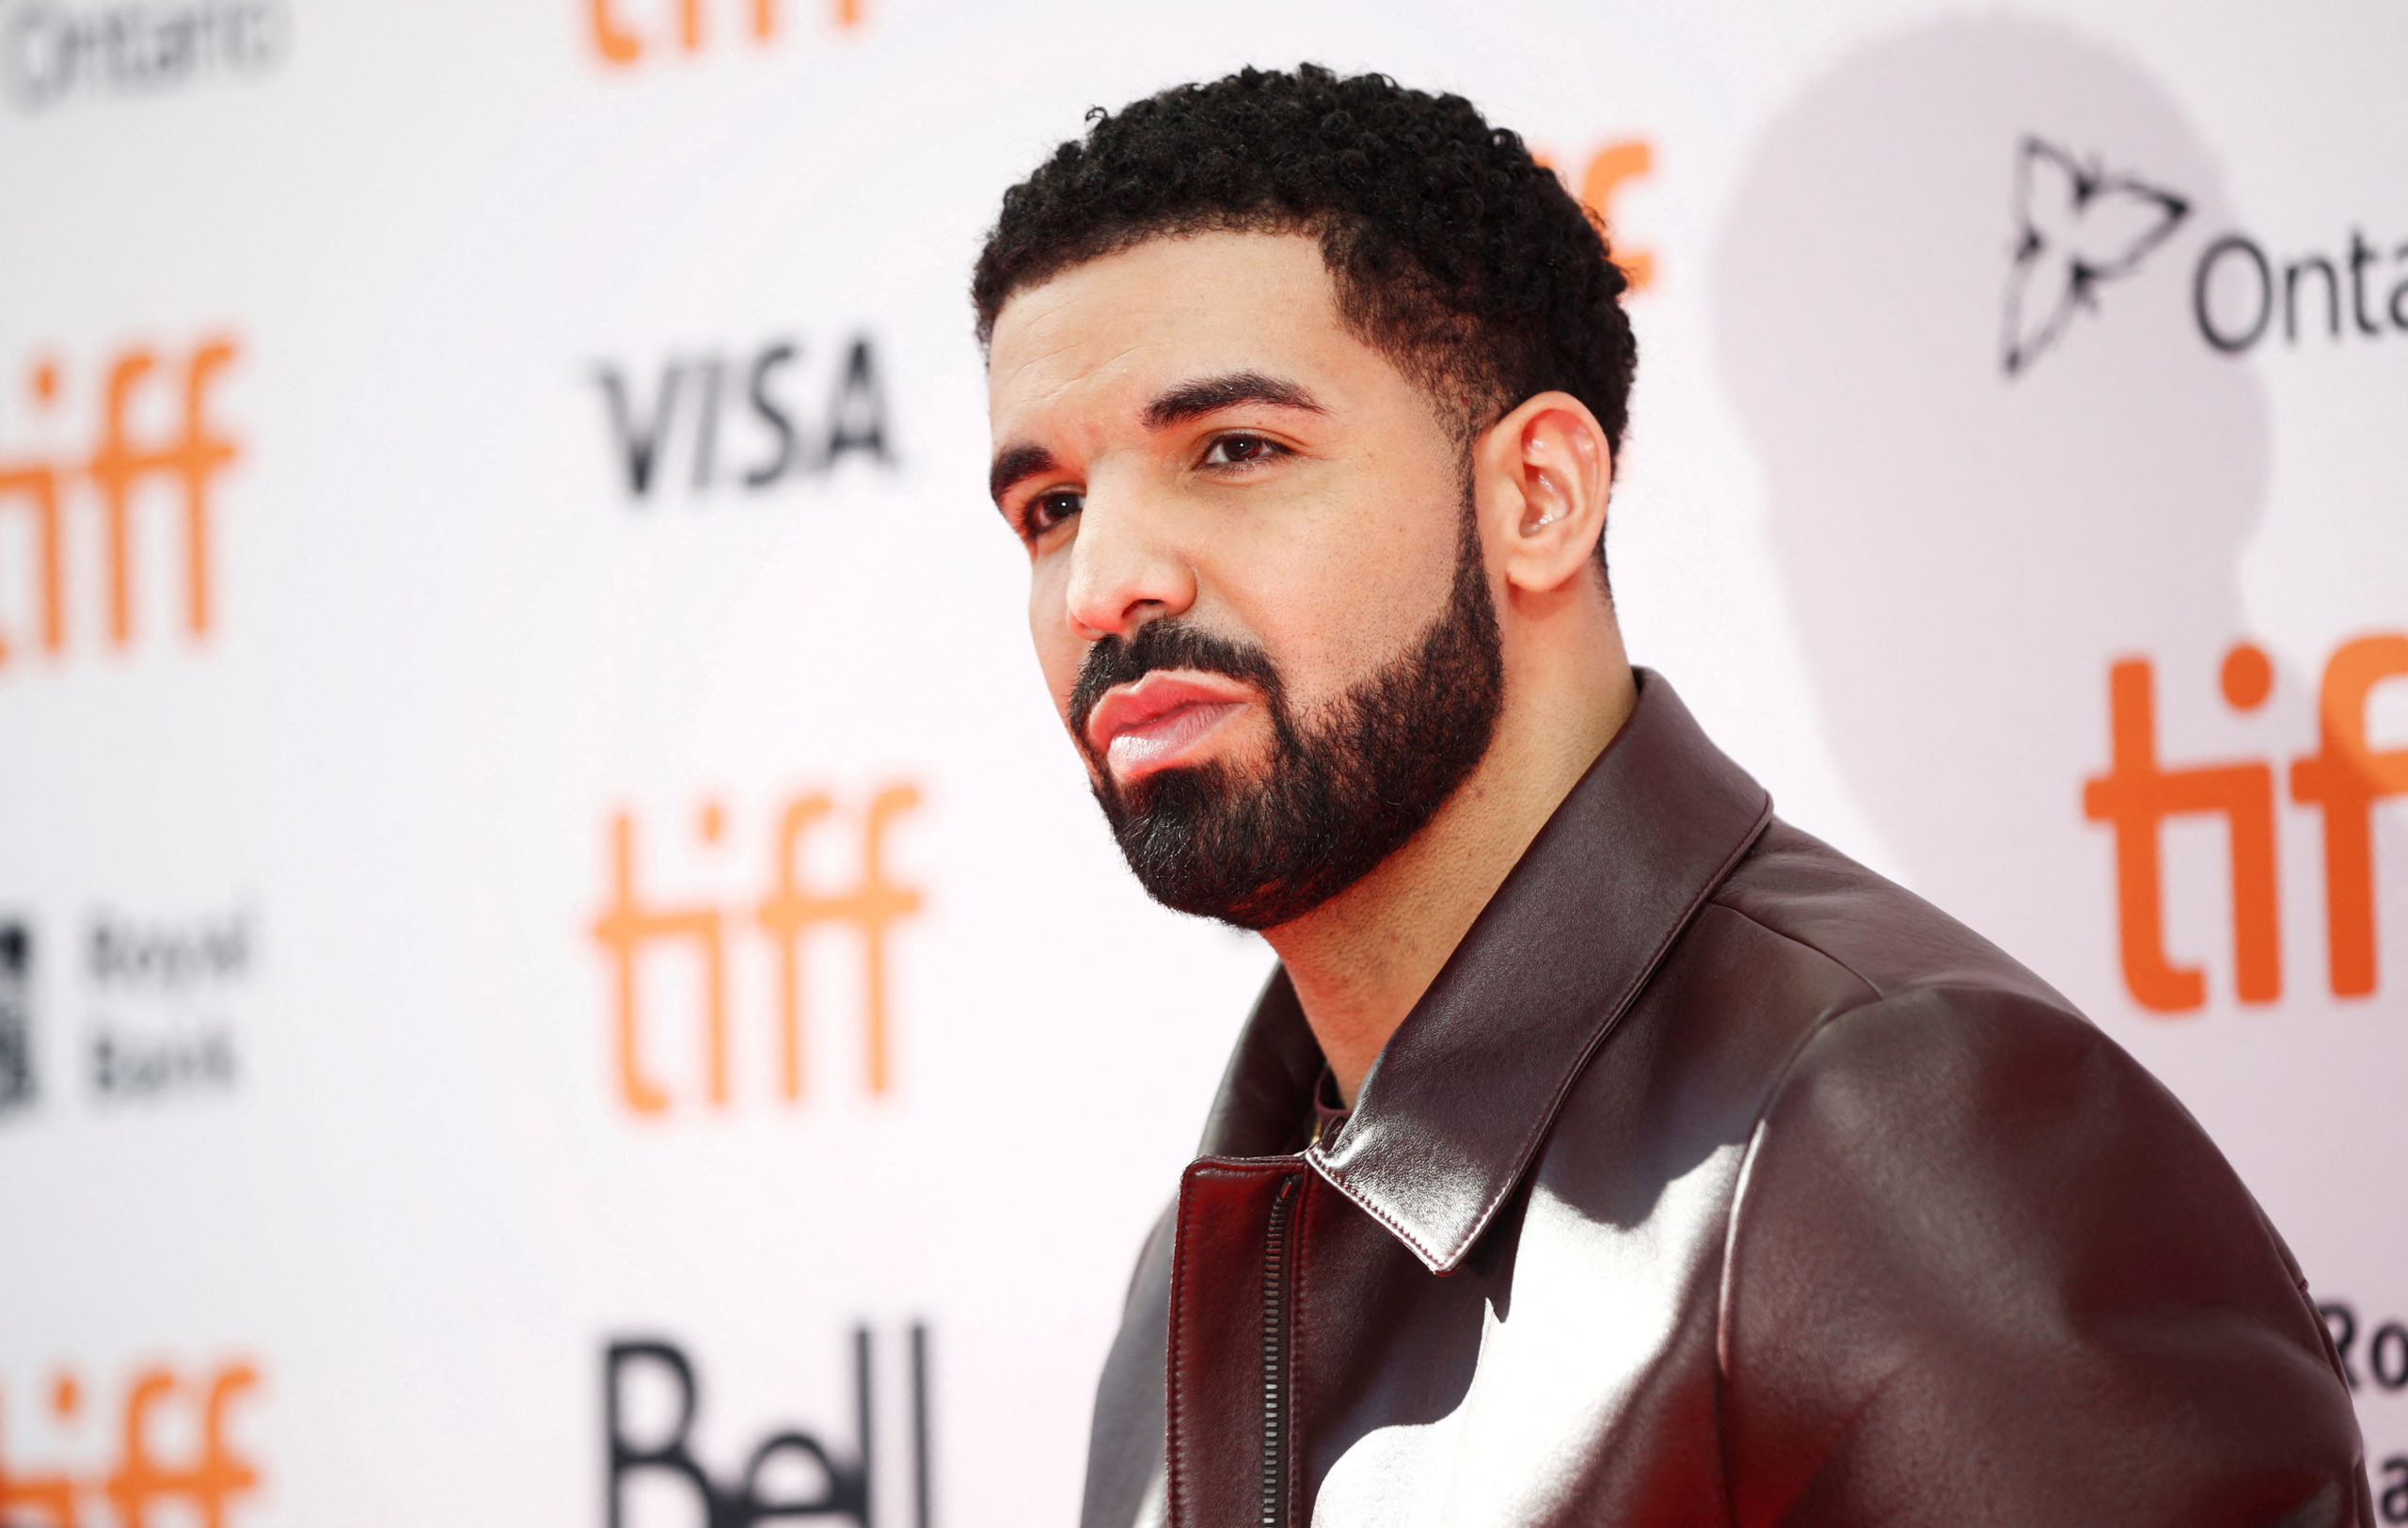 FILE PHOTO: Rapper Drake arrives on the red carpet for the film "The Carter Effect" at the Toronto International Film Festival (TIFF), in Toronto, Canada, September 9, 2017. REUTERS/Mark Blinch/File Photo